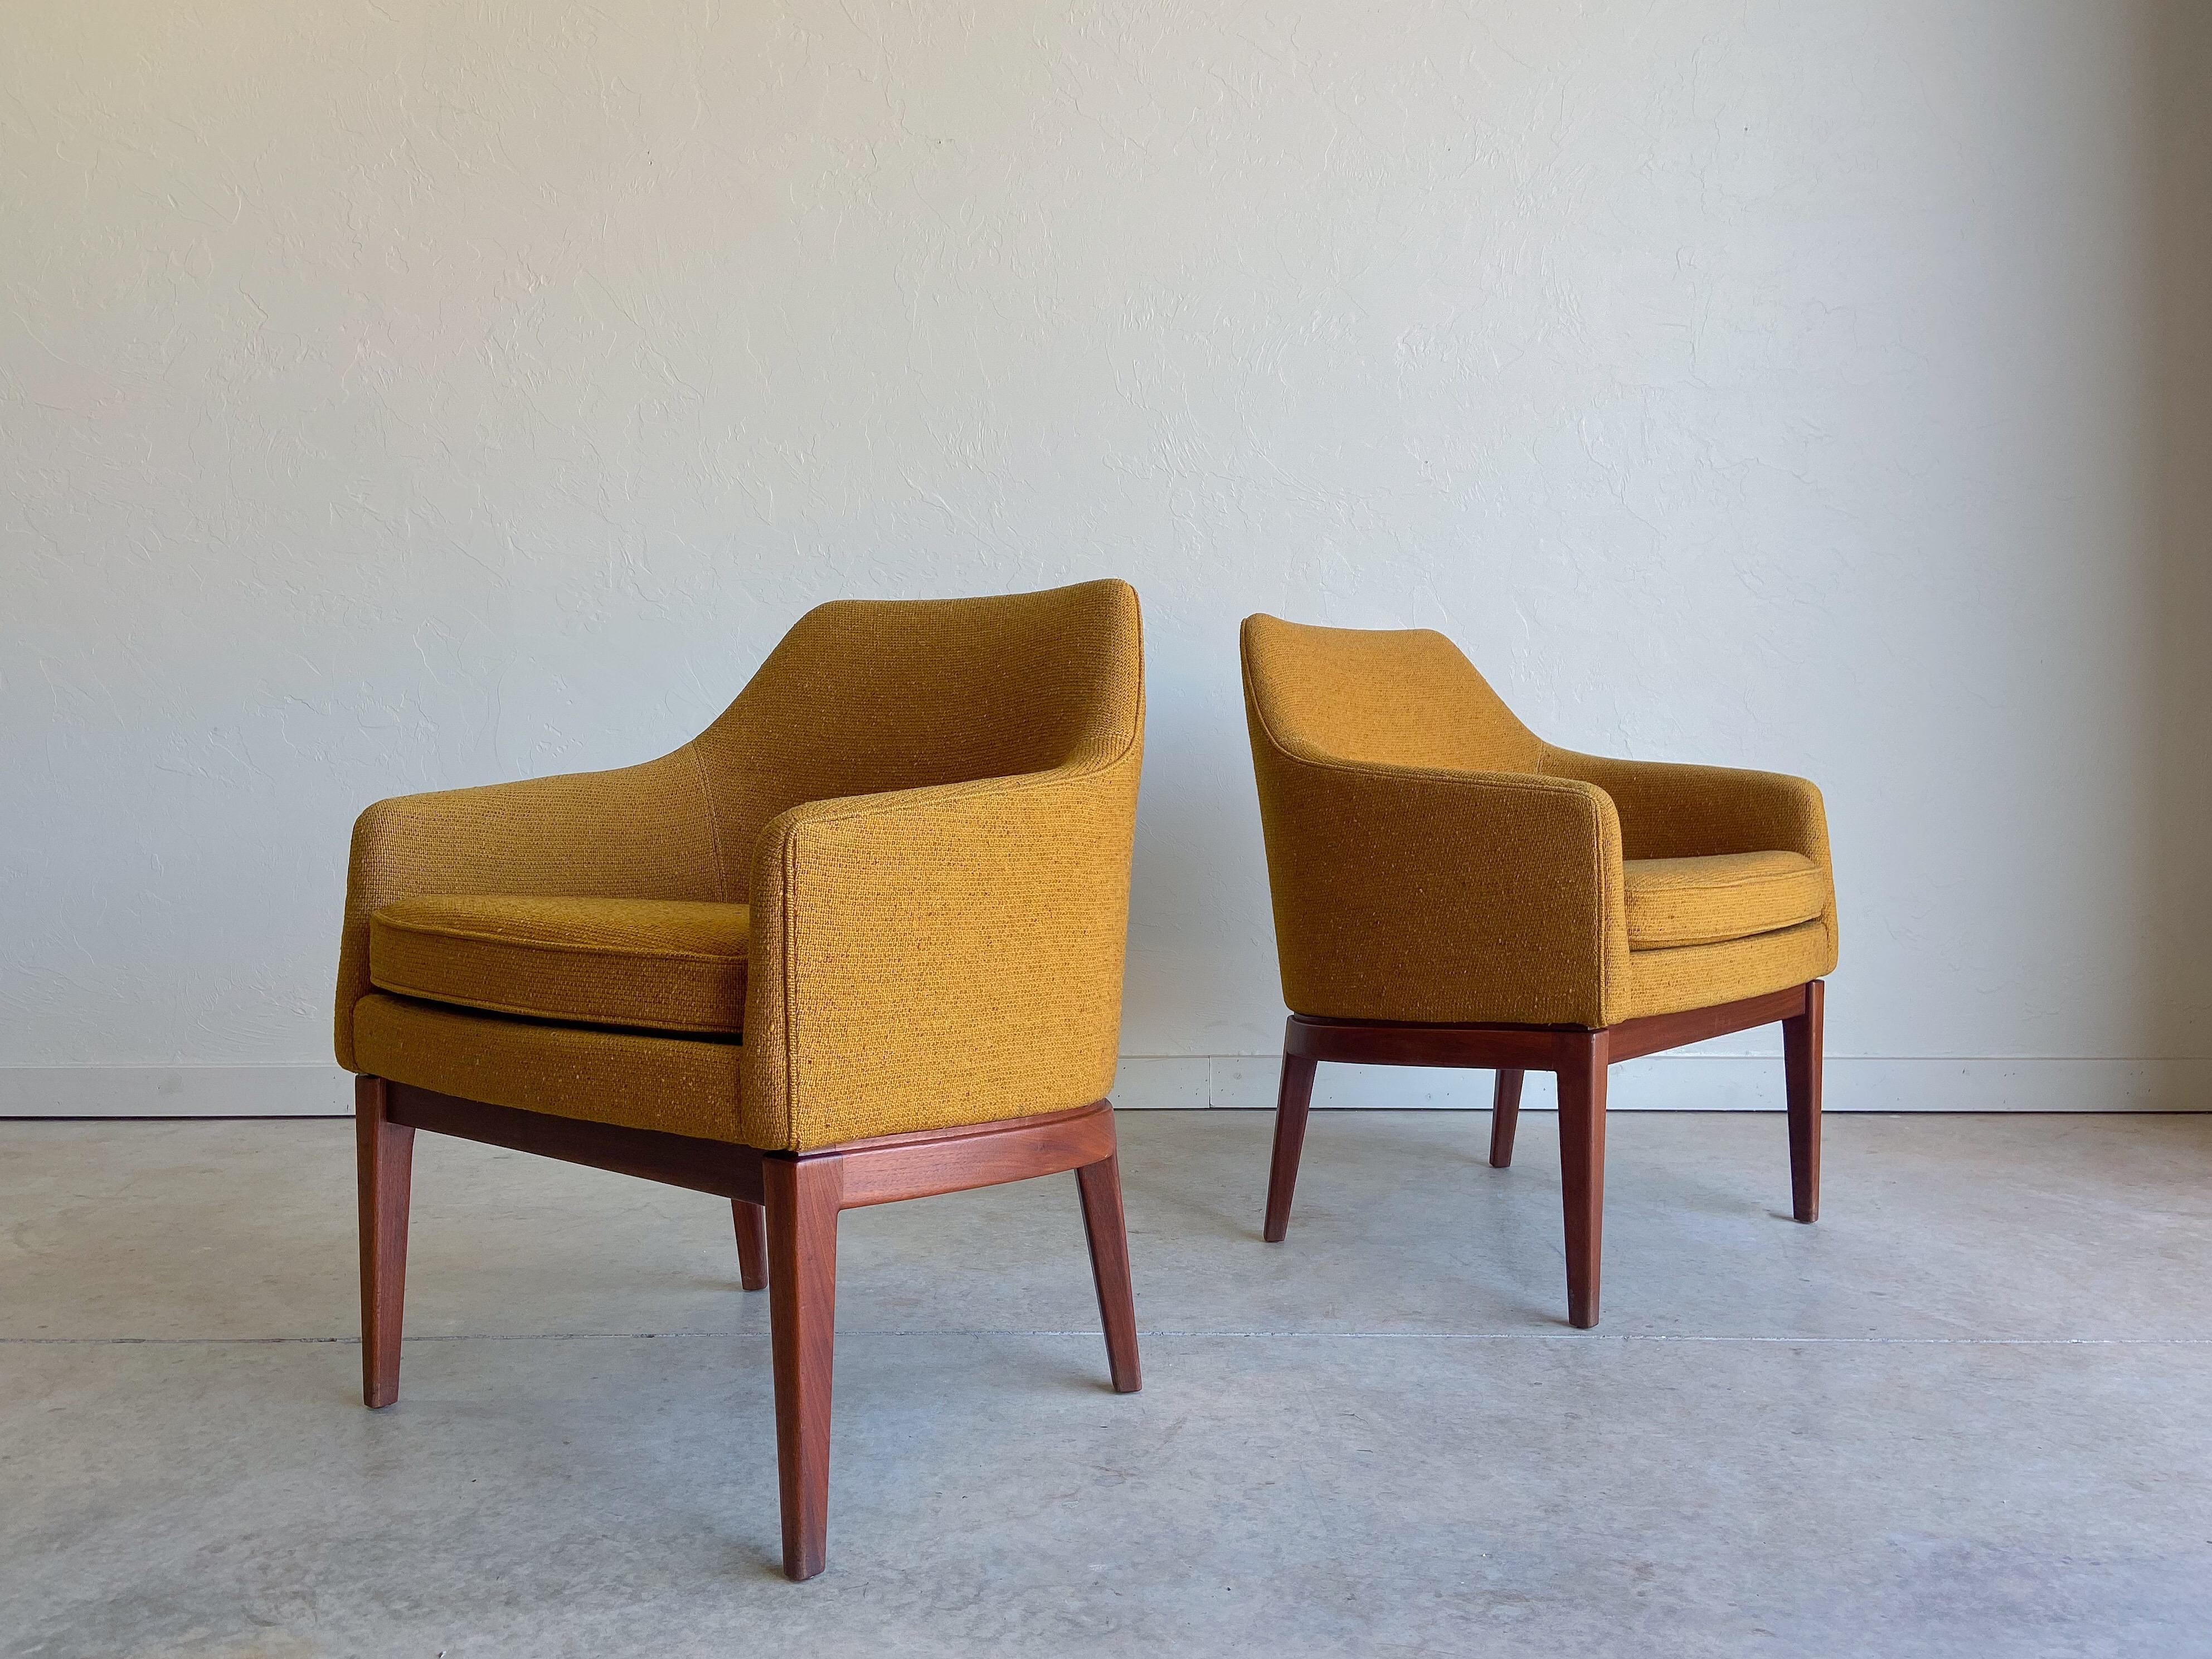 Offered is an amazing pair of armchairs designed by Jens Risom for Jens Risom Inc.

Beautiful and substantial walnut frames support the well proportioned seats which retain their original nubby yellow ochre upholstery. The upholstery is truly in